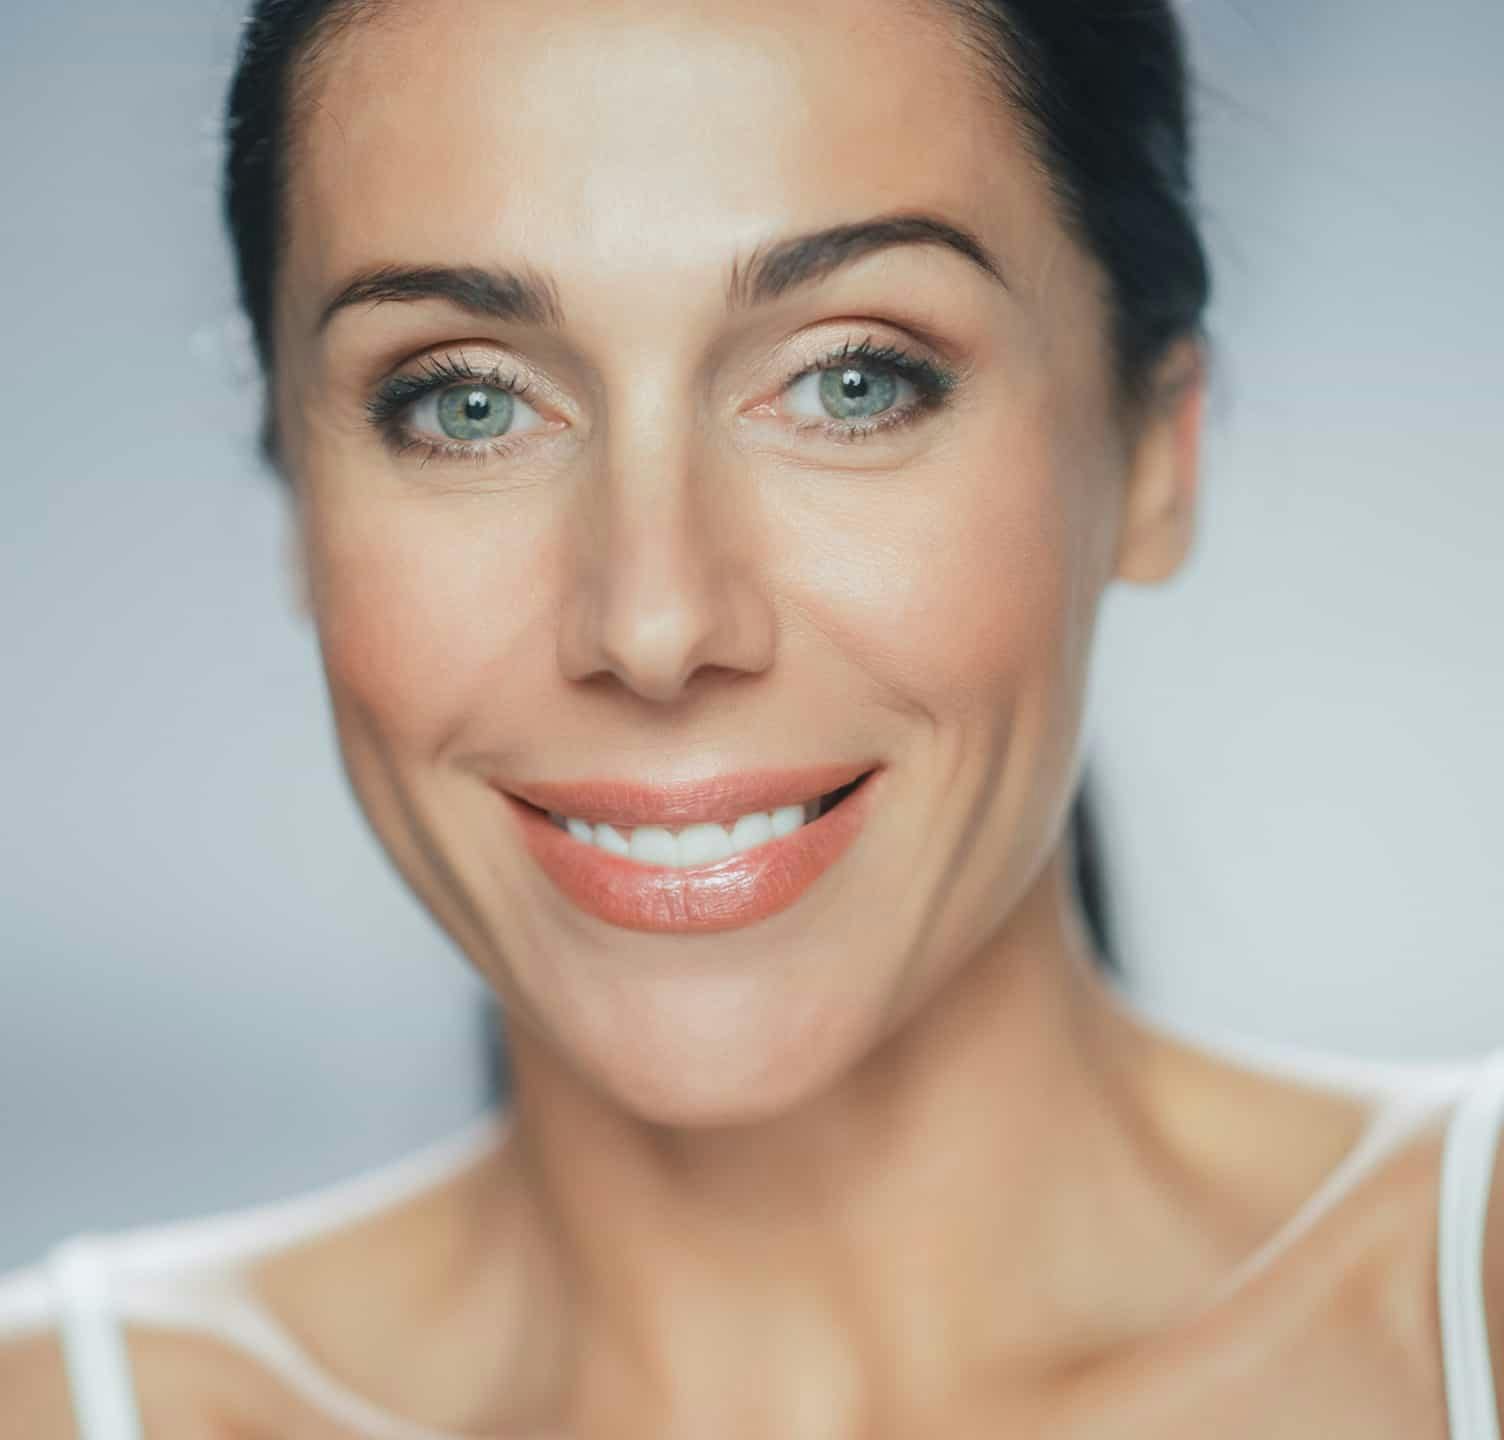 Woman with blue eyes smiling